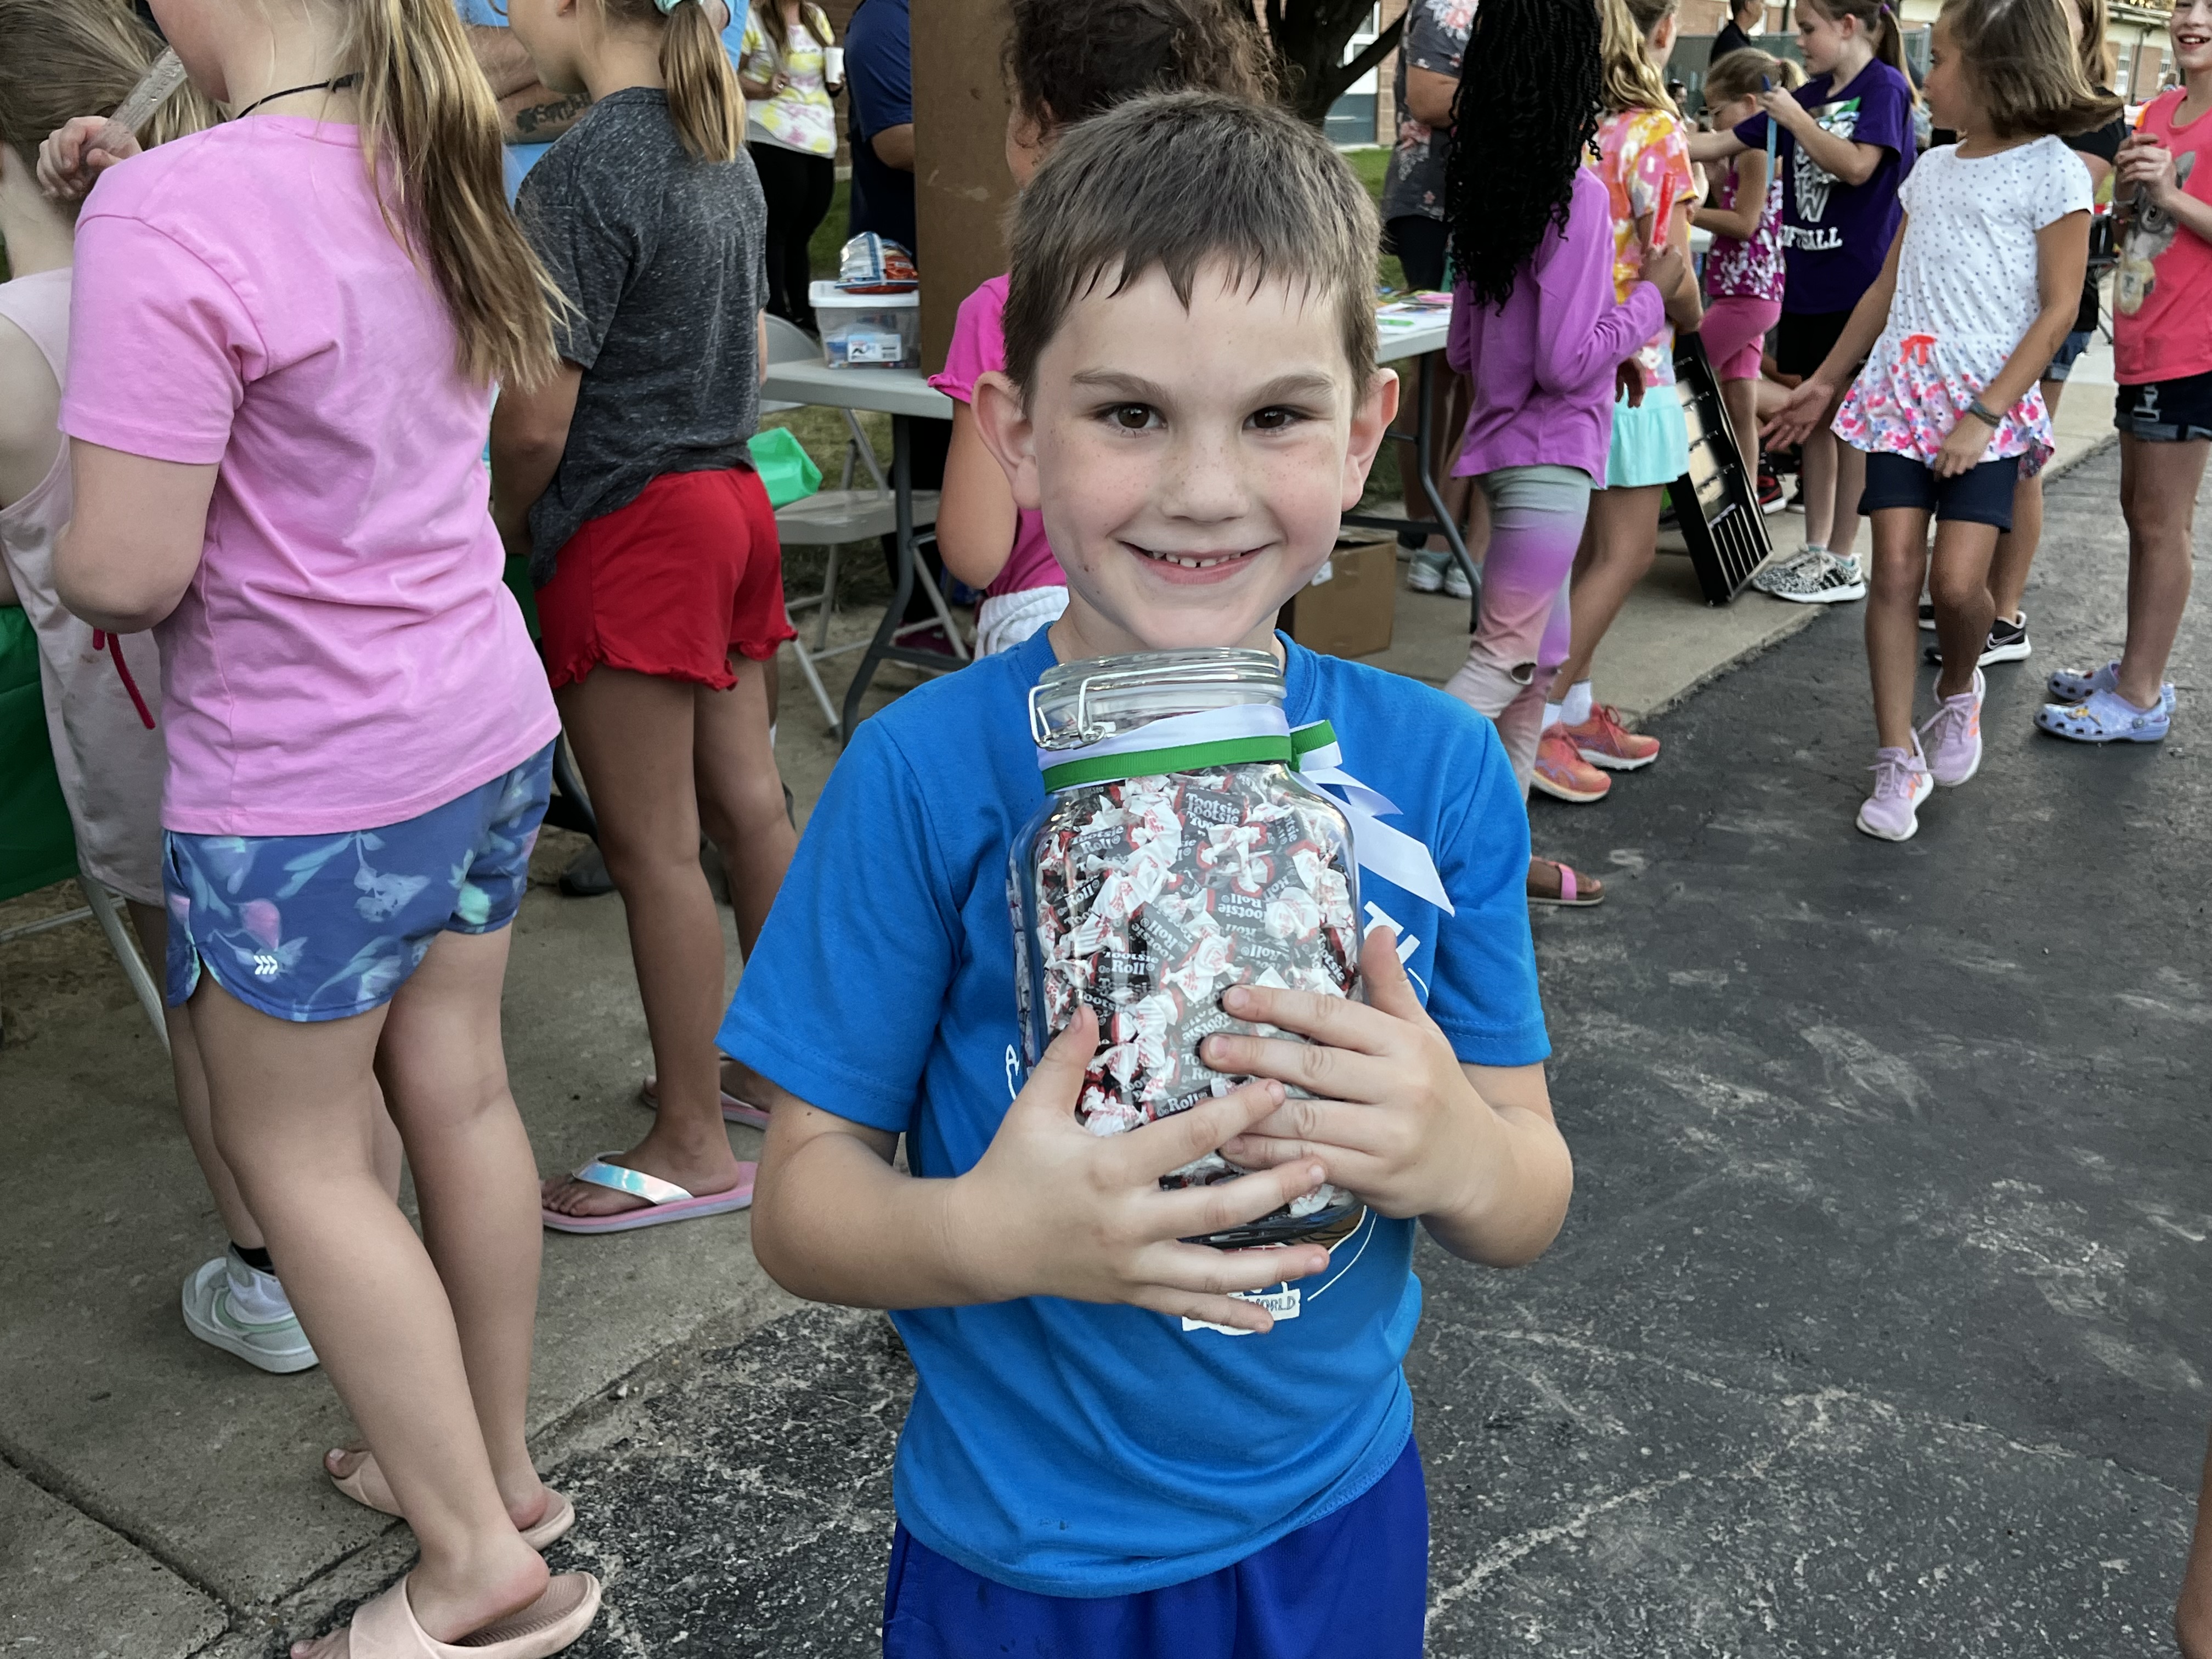 Winner of the candy guess jar